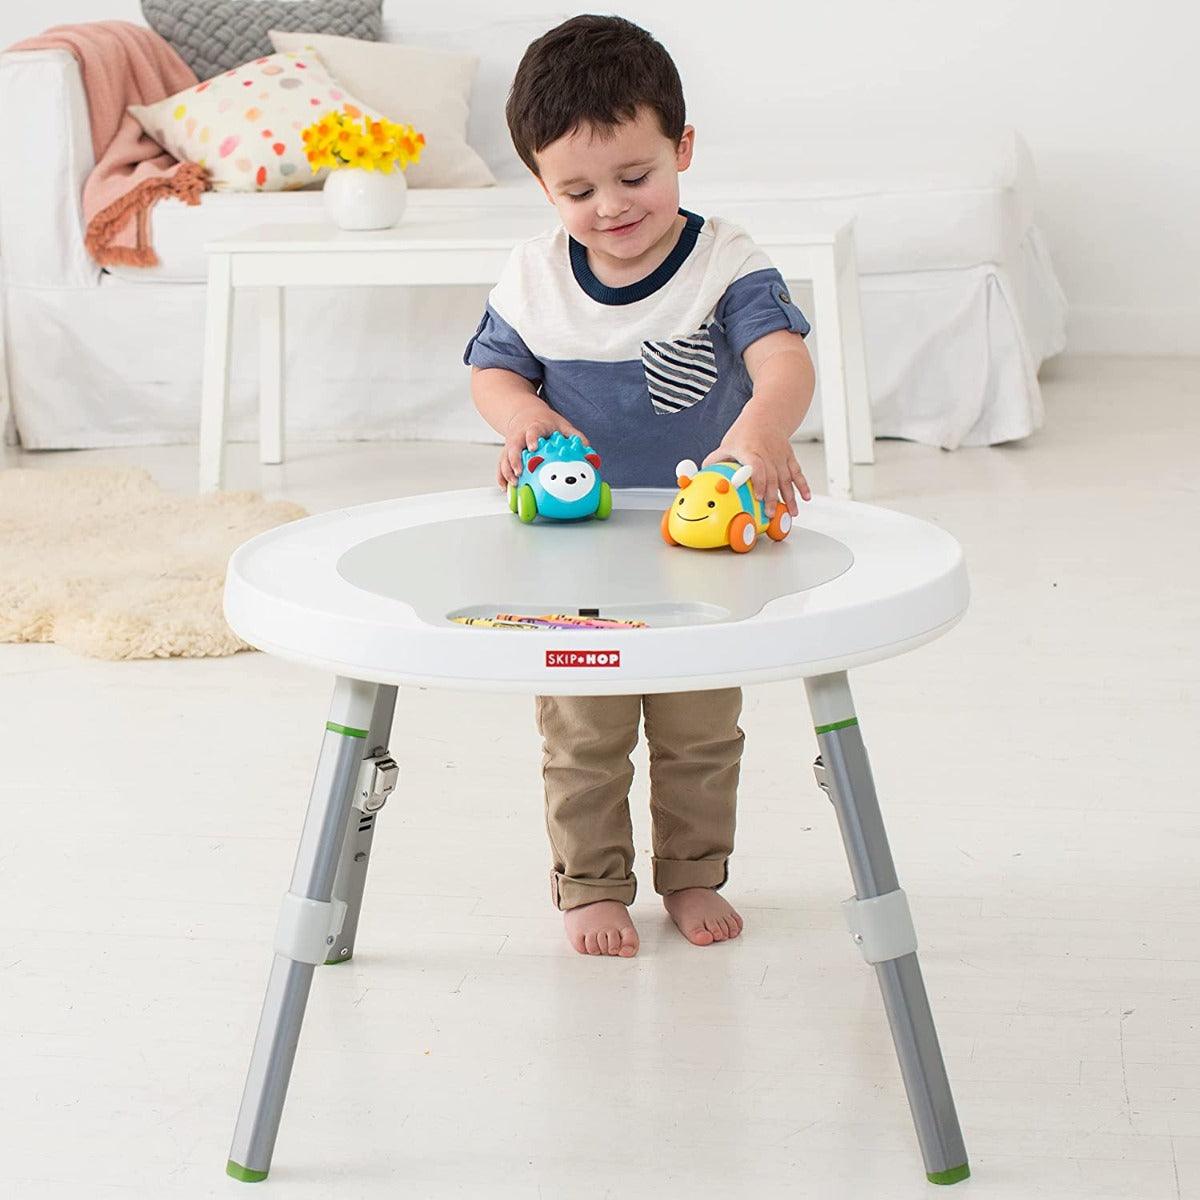 Skip Hop Explore & More Babys View 3 -Stage Activity Centre Multicolor - Activity Gear For Ages 0-4 Years